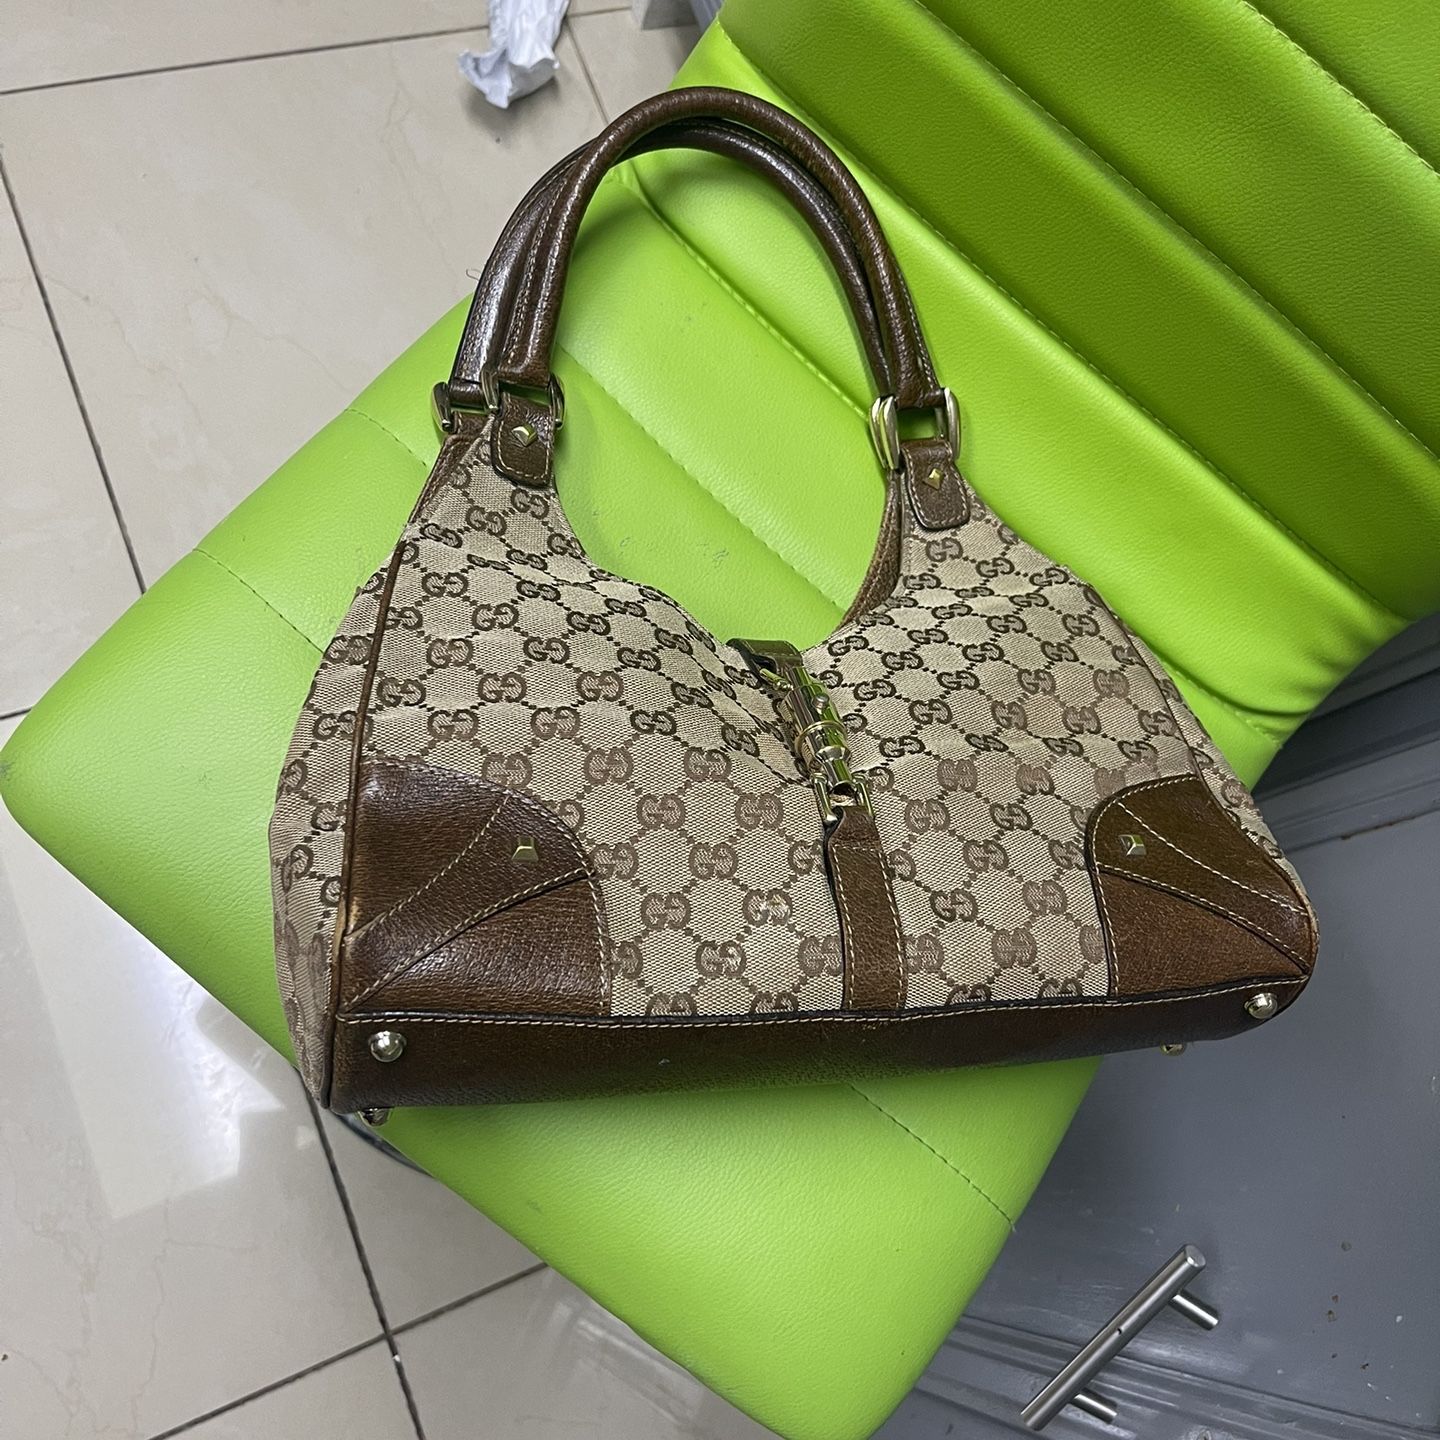 Small Size Gucci Bag Excellent Condition 